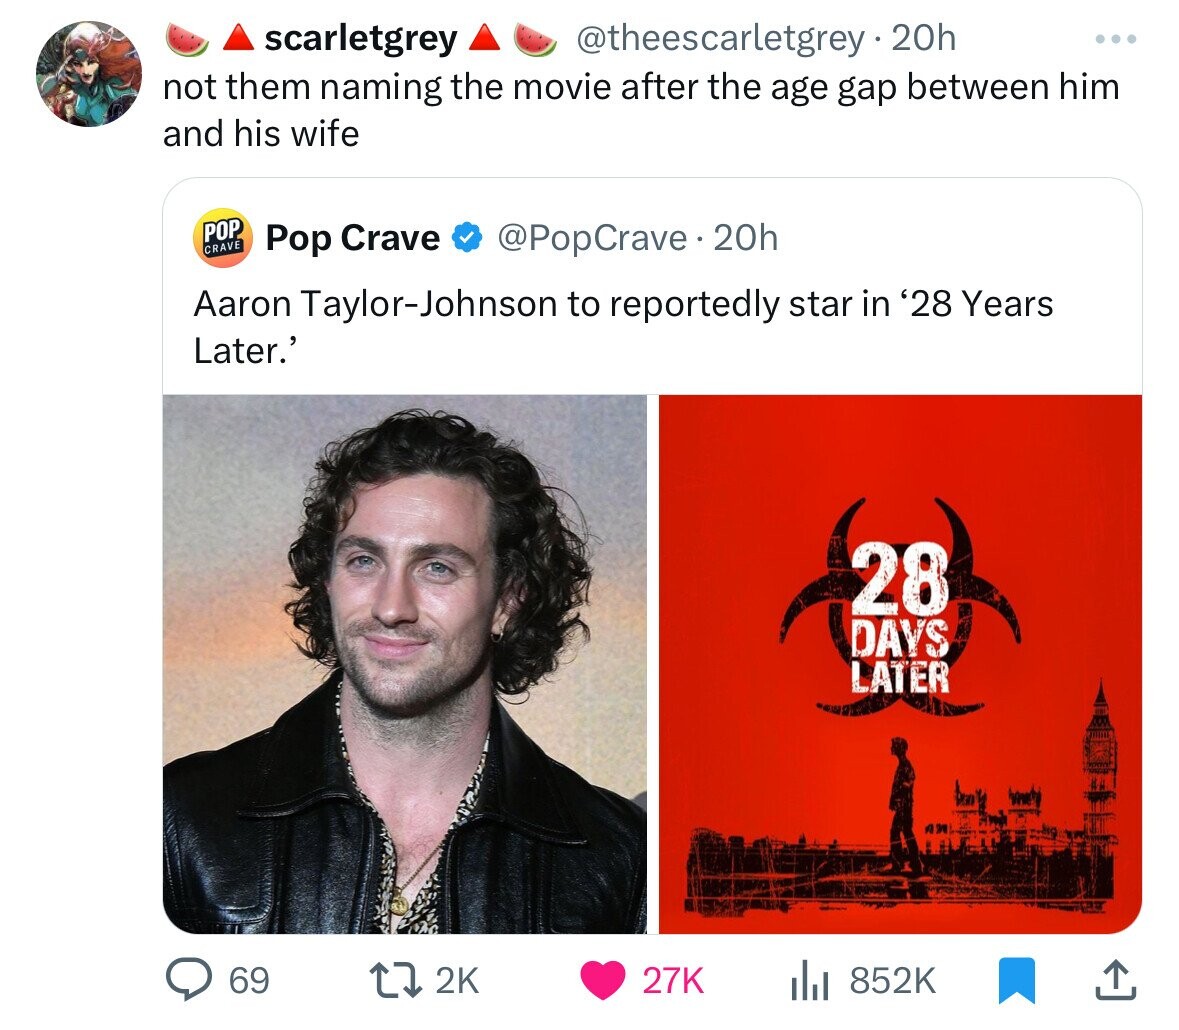 scarletgrey @theescarletgrey.20h ... not them naming the movie after the age gap between him and his wife POP CRAVE Pop Crave @PopCrave.20h Aaron Taylor-Johnson to reportedly star in '28 Years Later.' 28 DAYS LATER 69 2K 27K 852K 